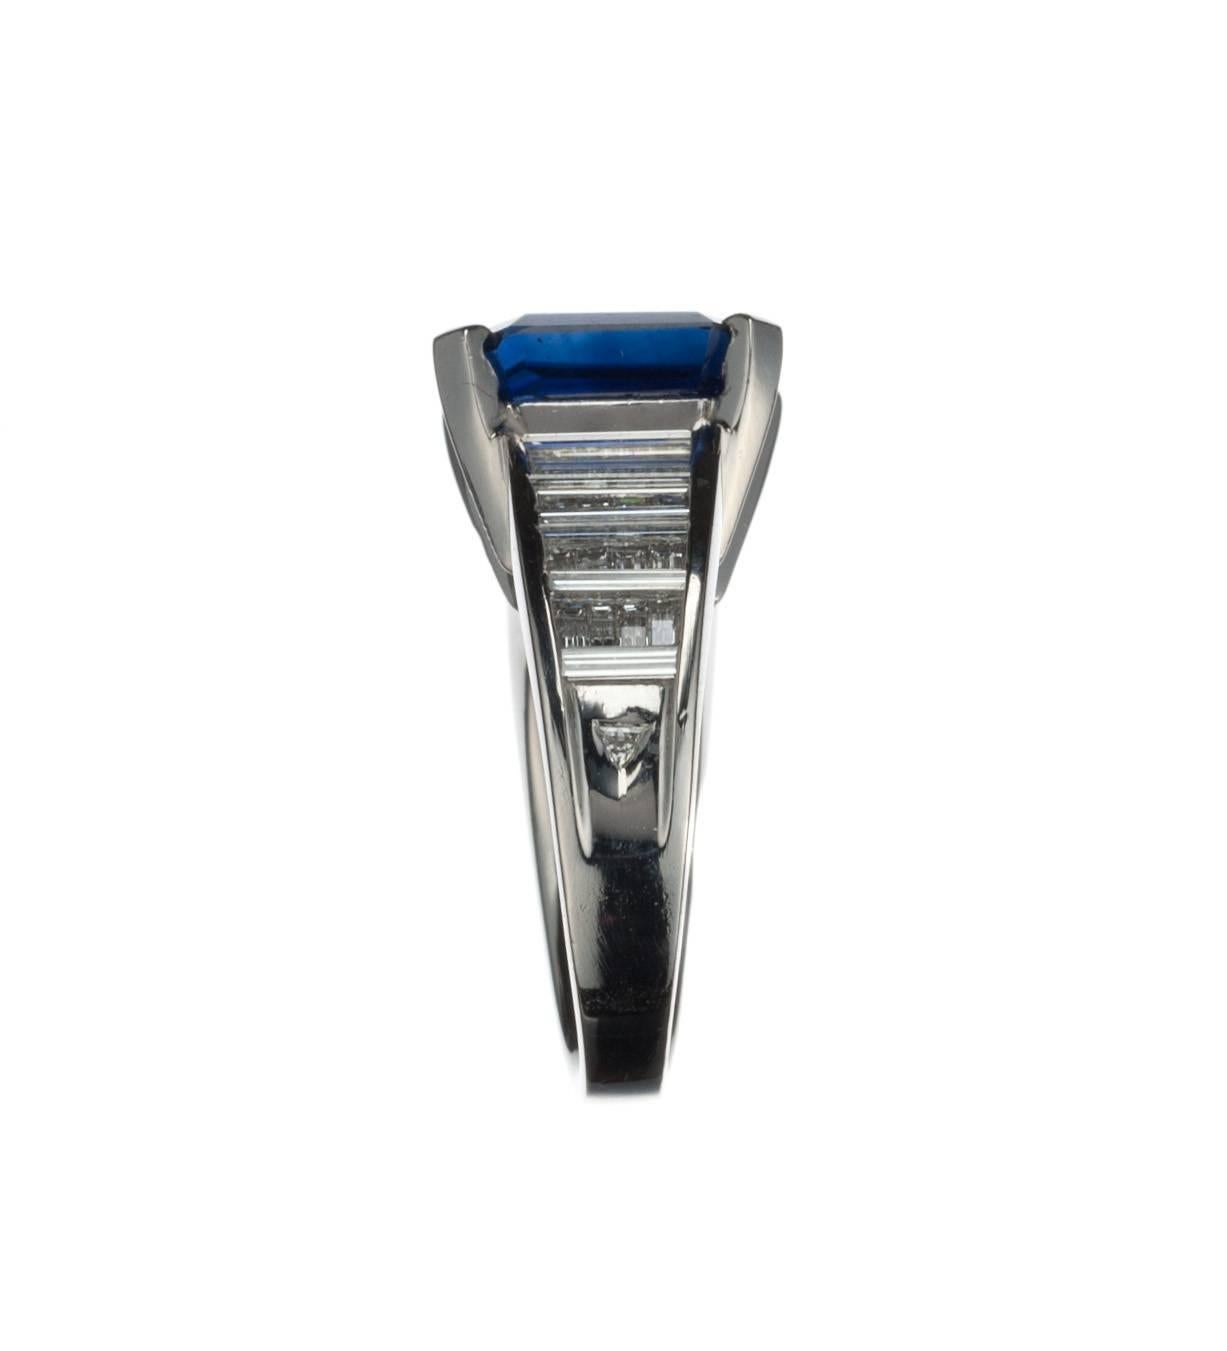 A ring of remarkable stature and poise, this piece features an emerald-cut sapphire, 7.07ct., set in a mounting of platinum and diamond. 44 baguette-shaped and two trillion-shaped diamonds, 1.63ctw. of G-H color and VVS-VS clarity, are set along the